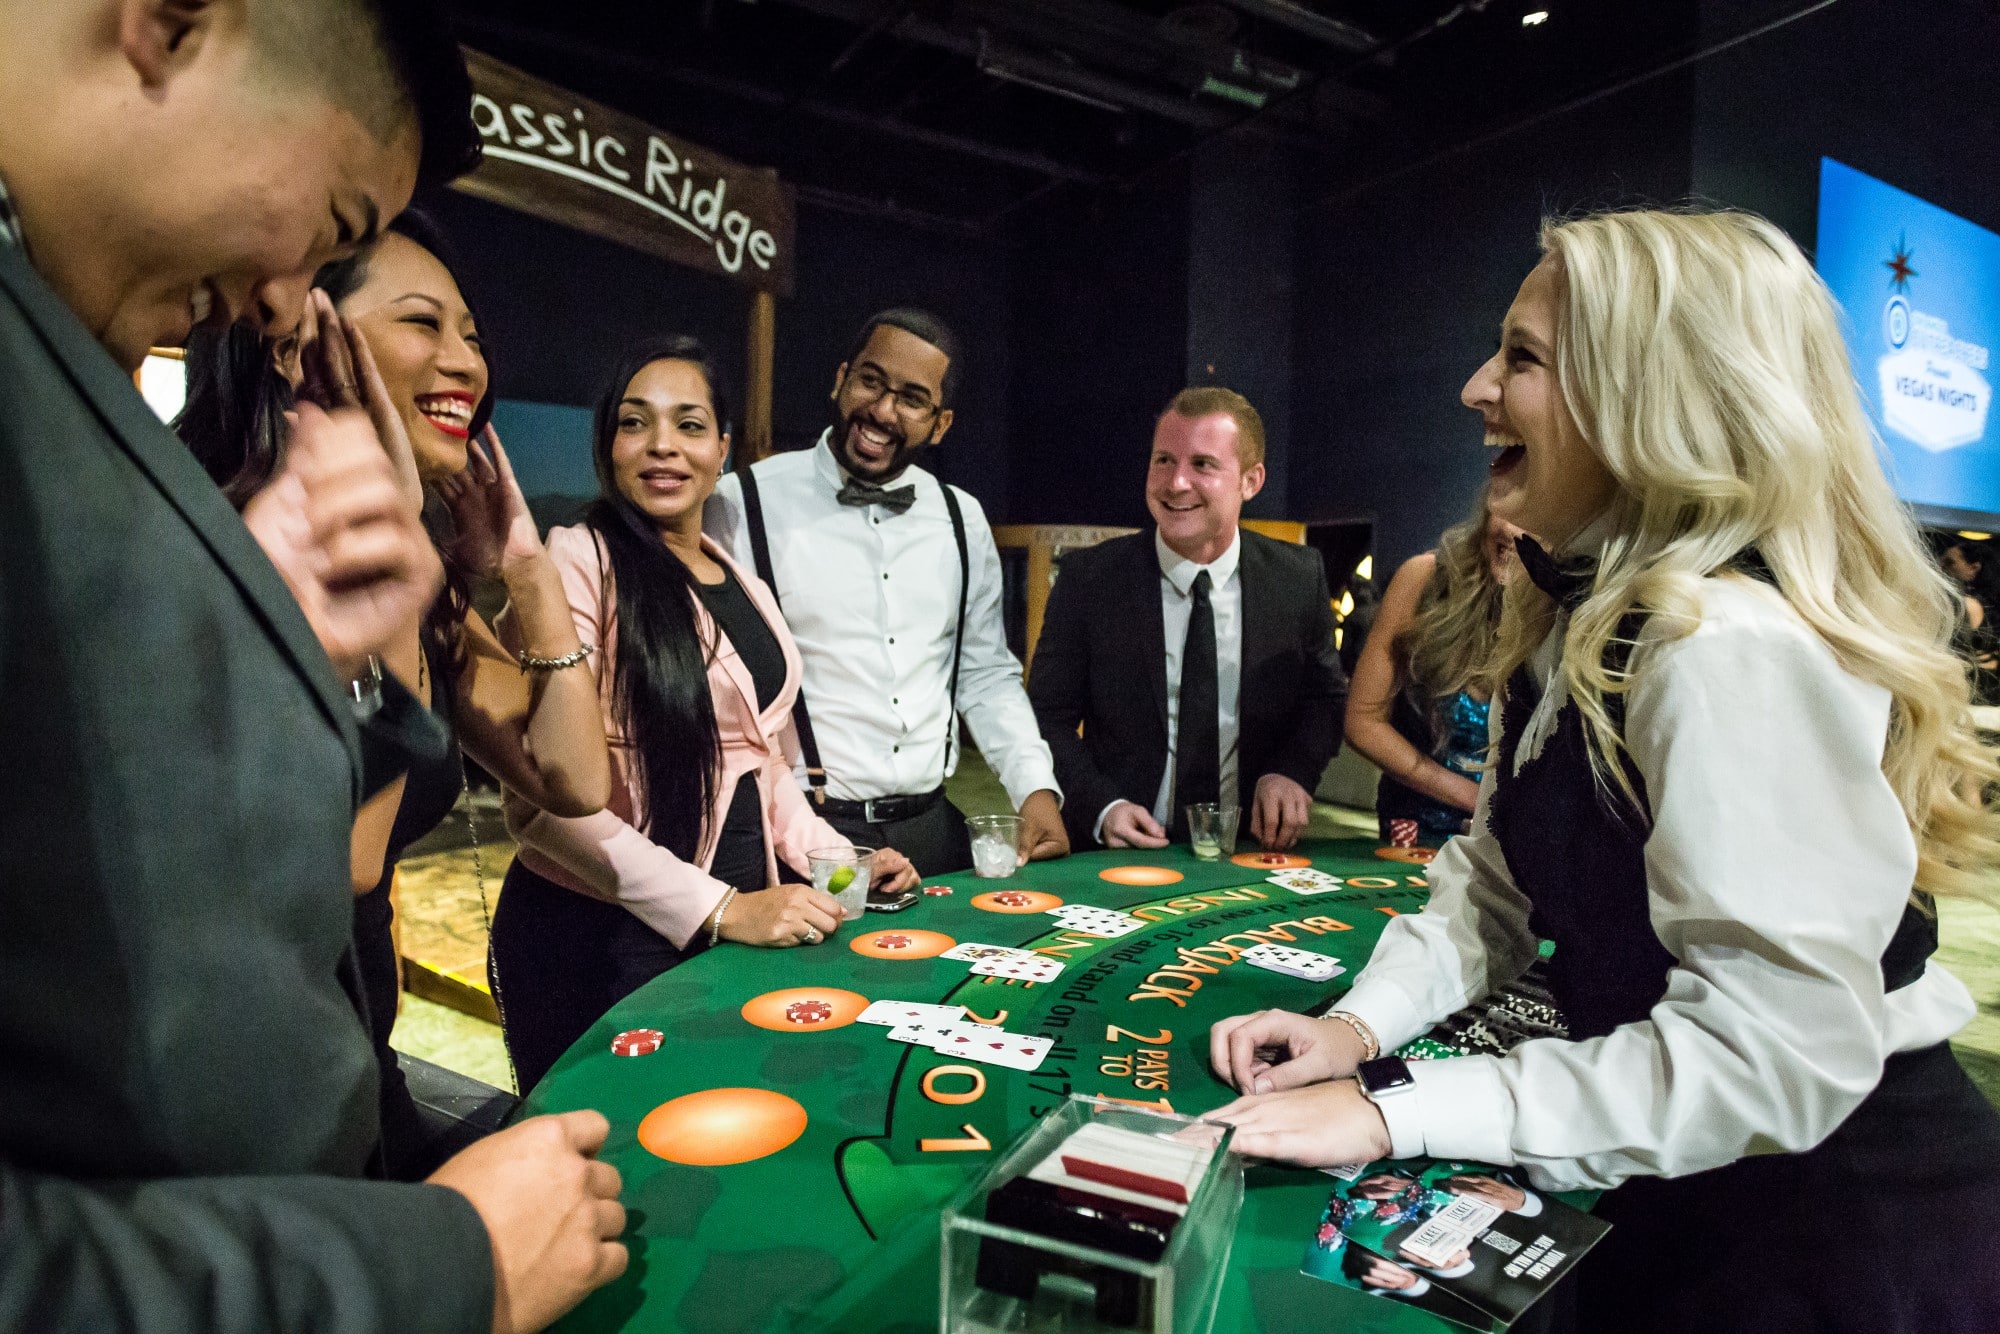 How to play blackjack at a corporate event?